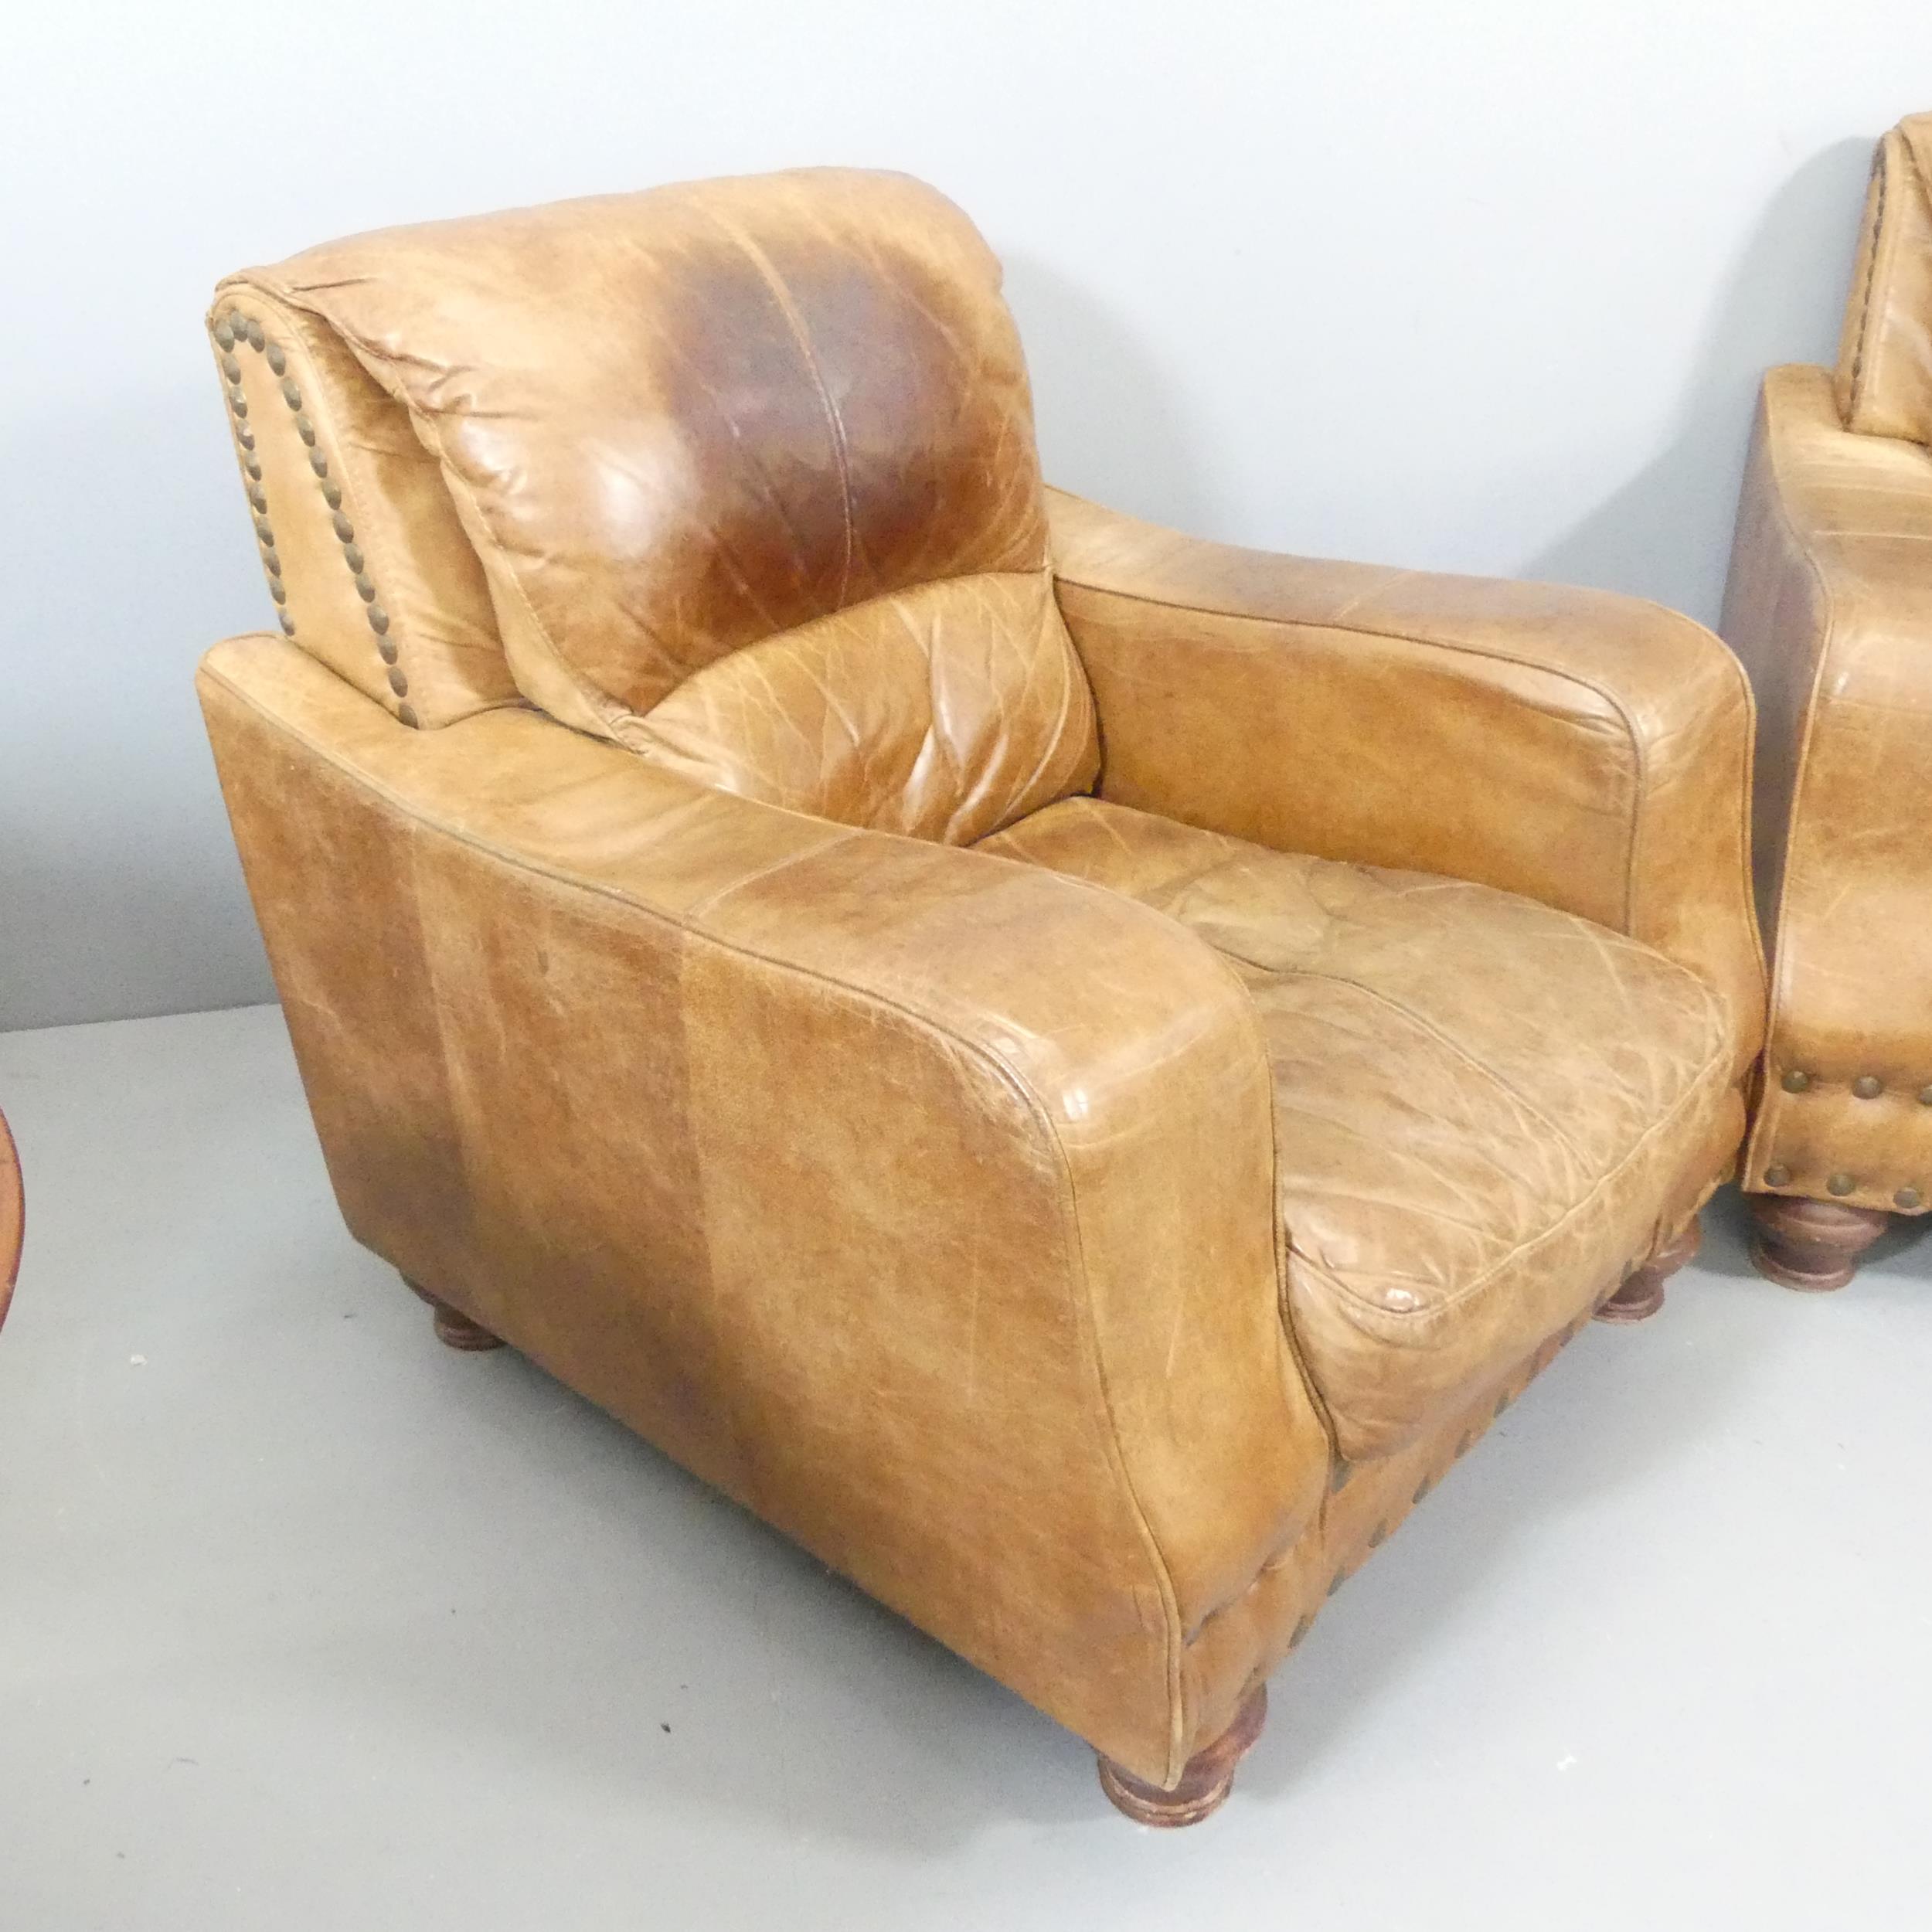 A pair of brown studded-leather upholstered club armchairs. Overall 85x94x94cm, seat 48x40x60cm. - Image 2 of 2